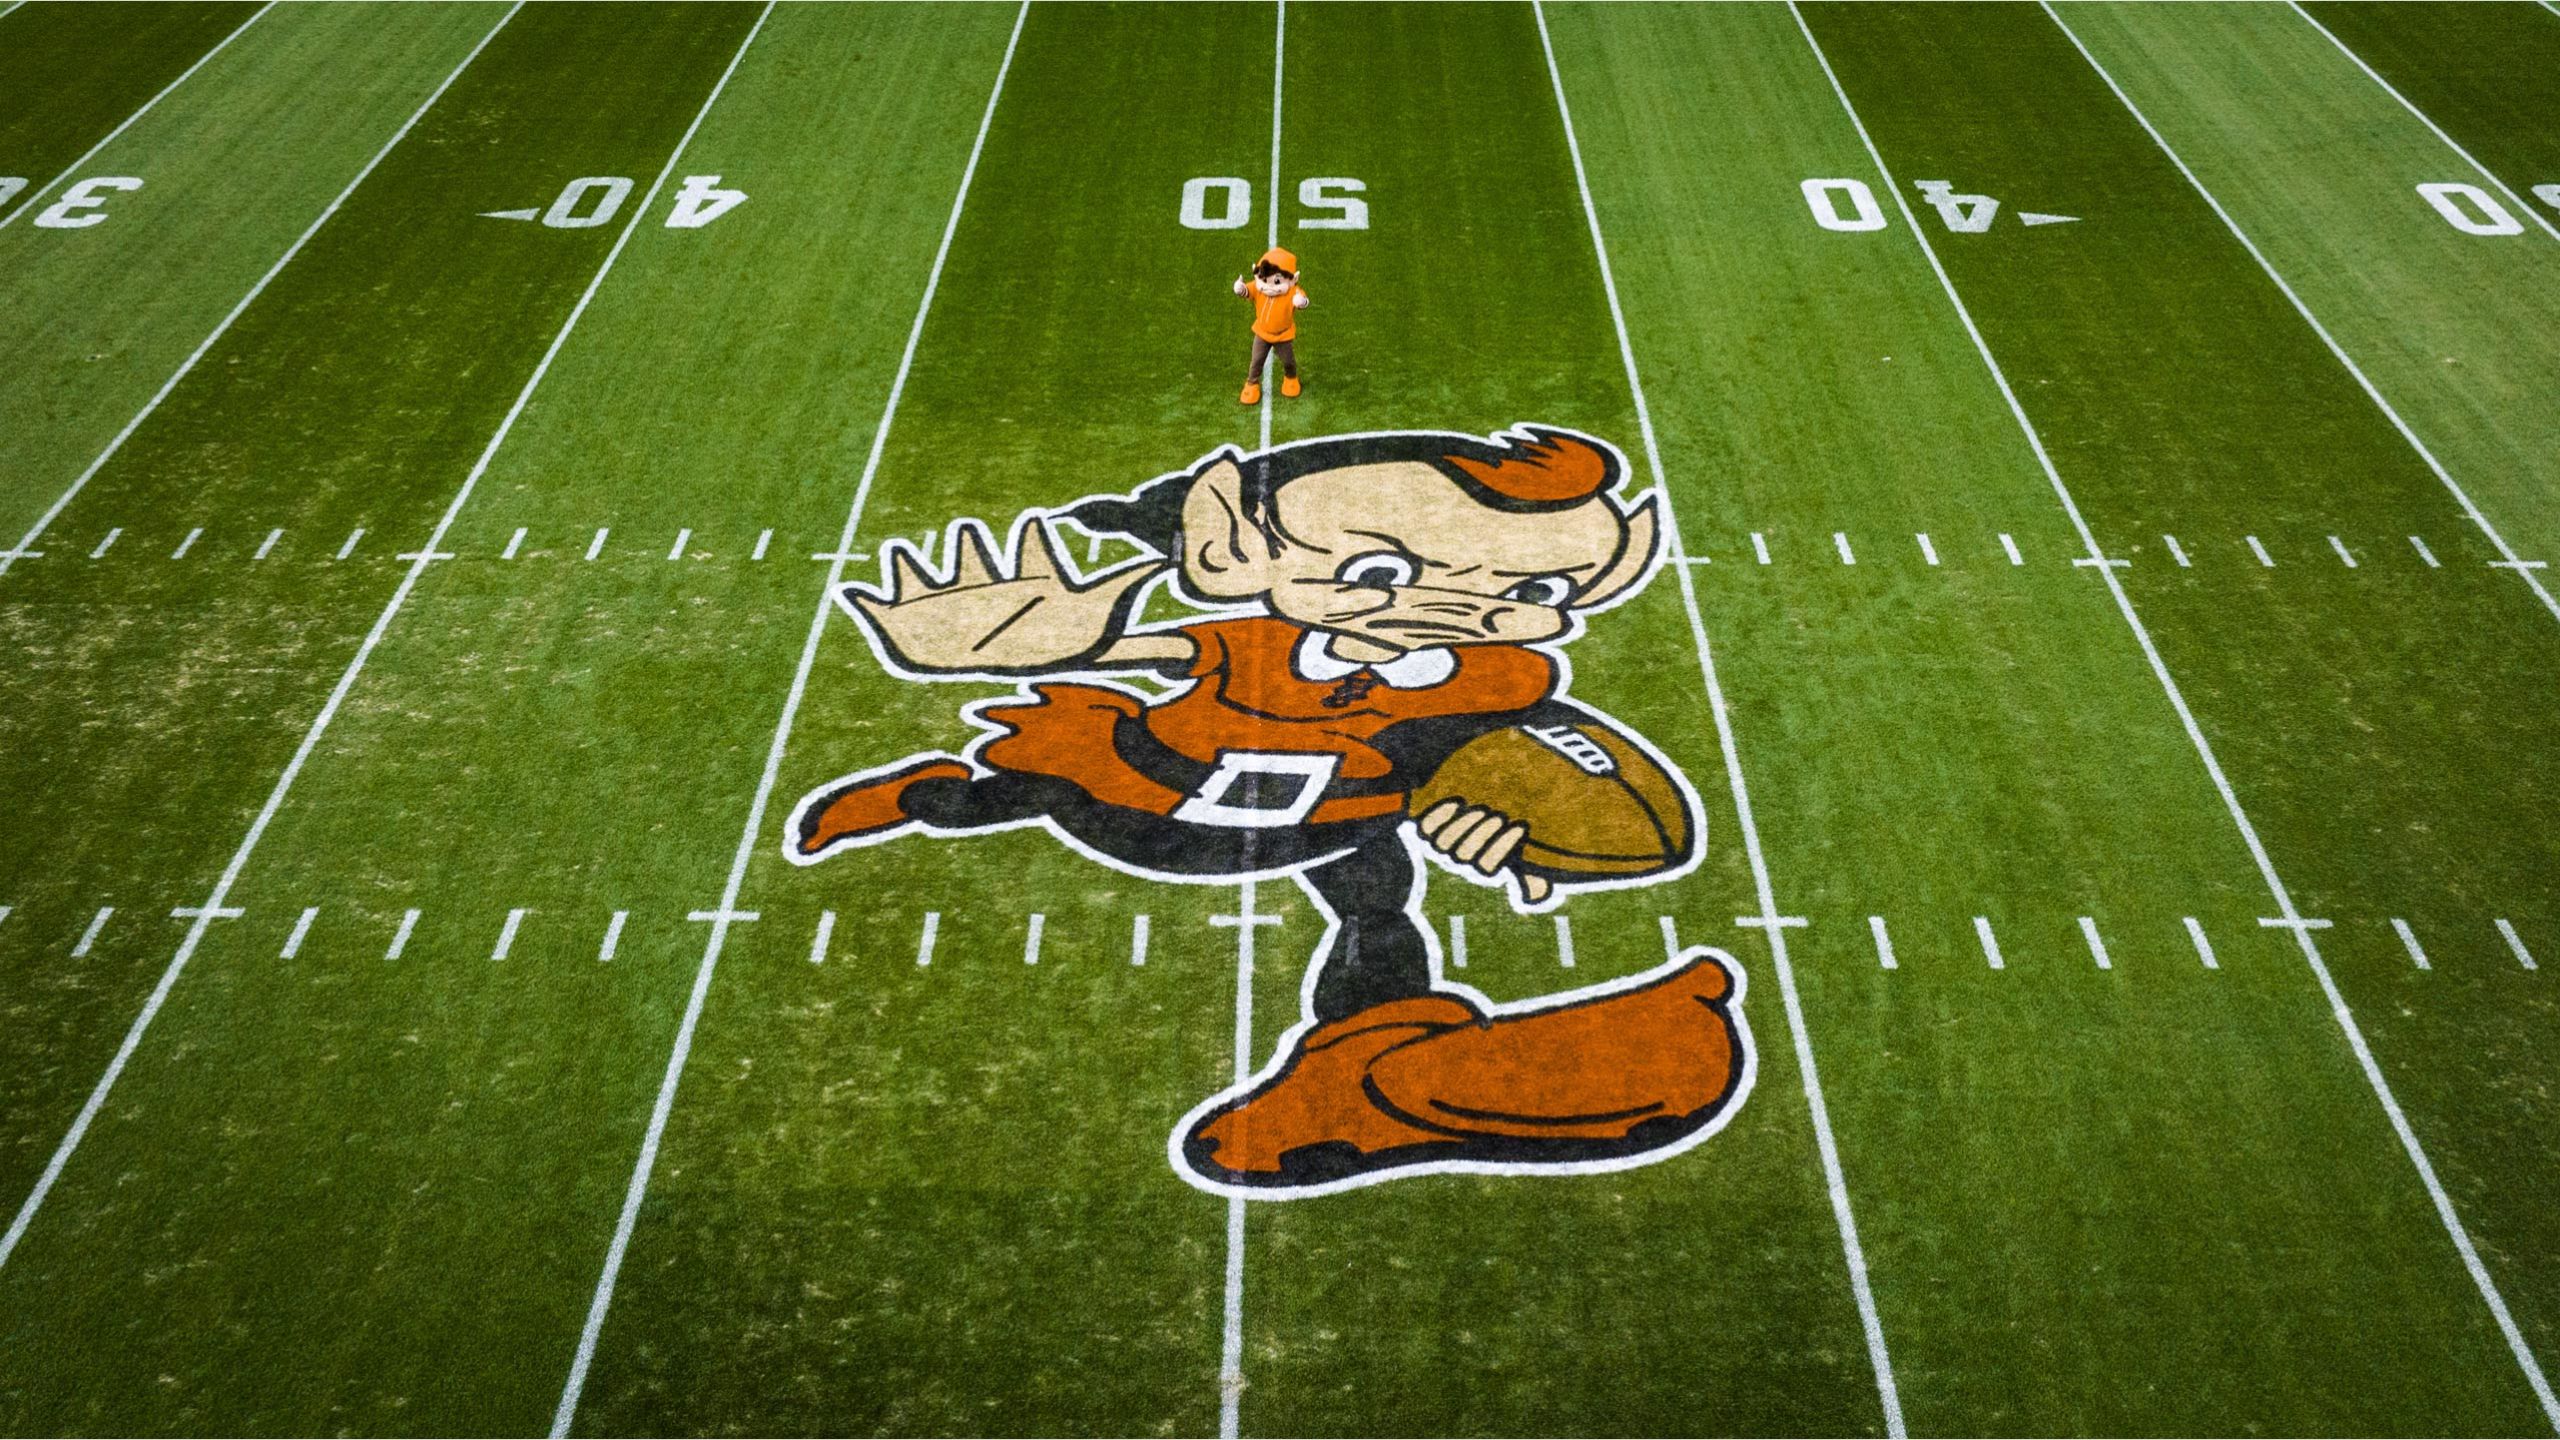 NFL world reacts to Browns' awesome midfield logo change